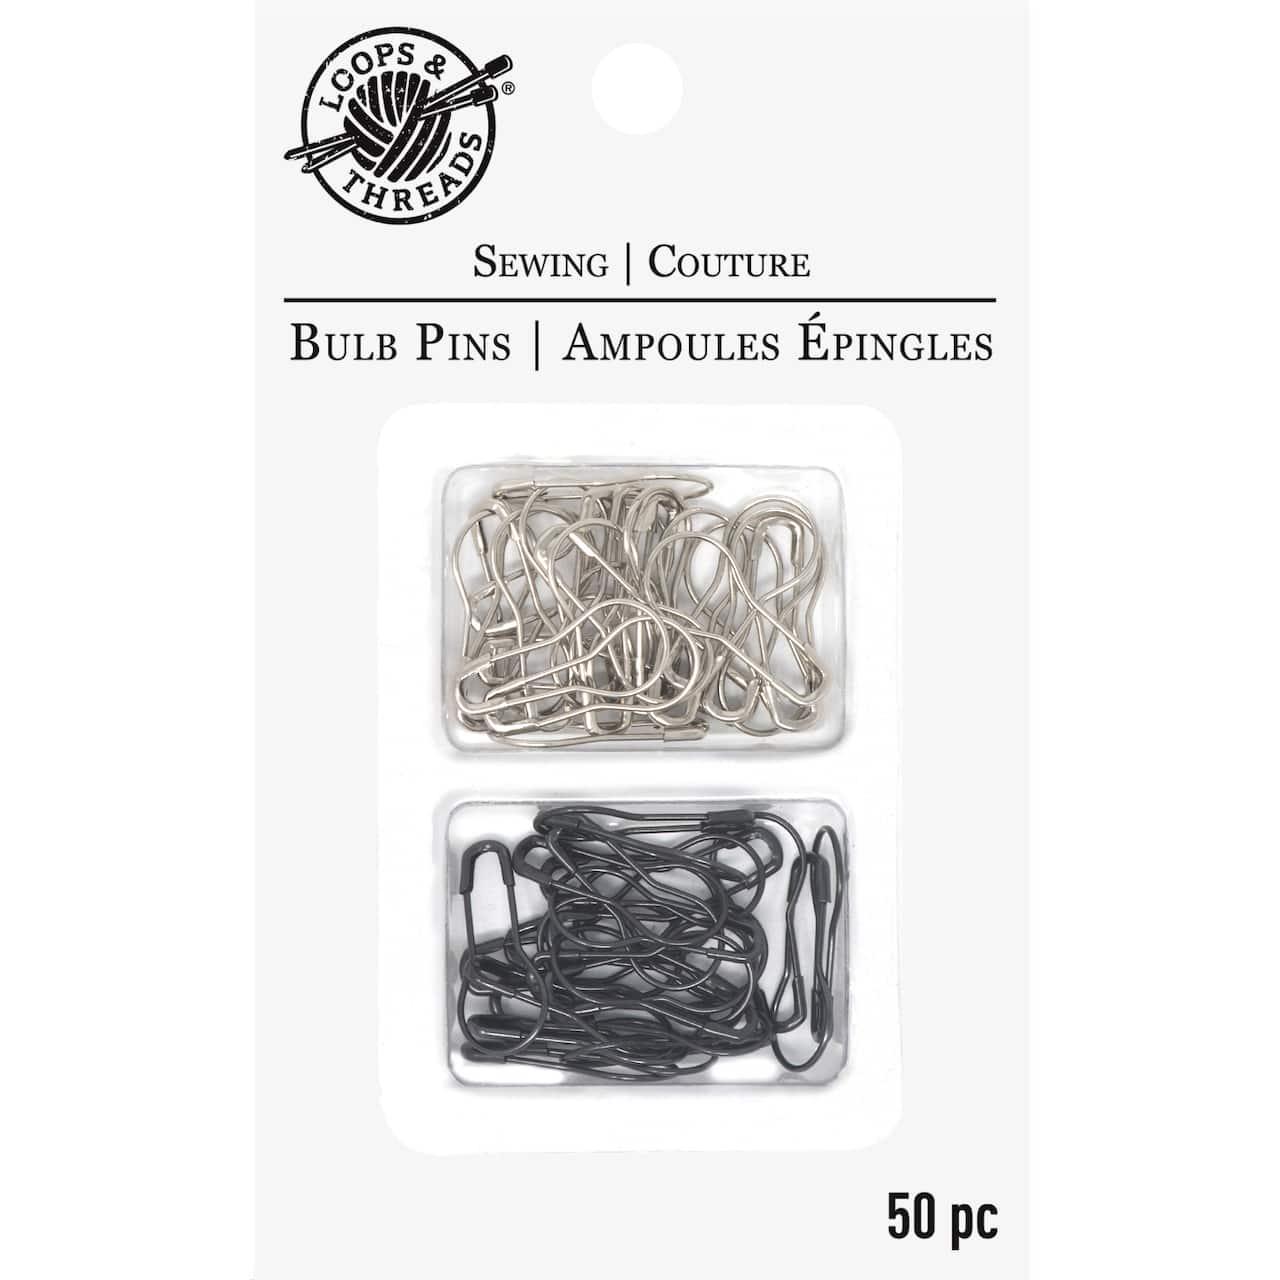 Bulb Pins By Loops & Threads®